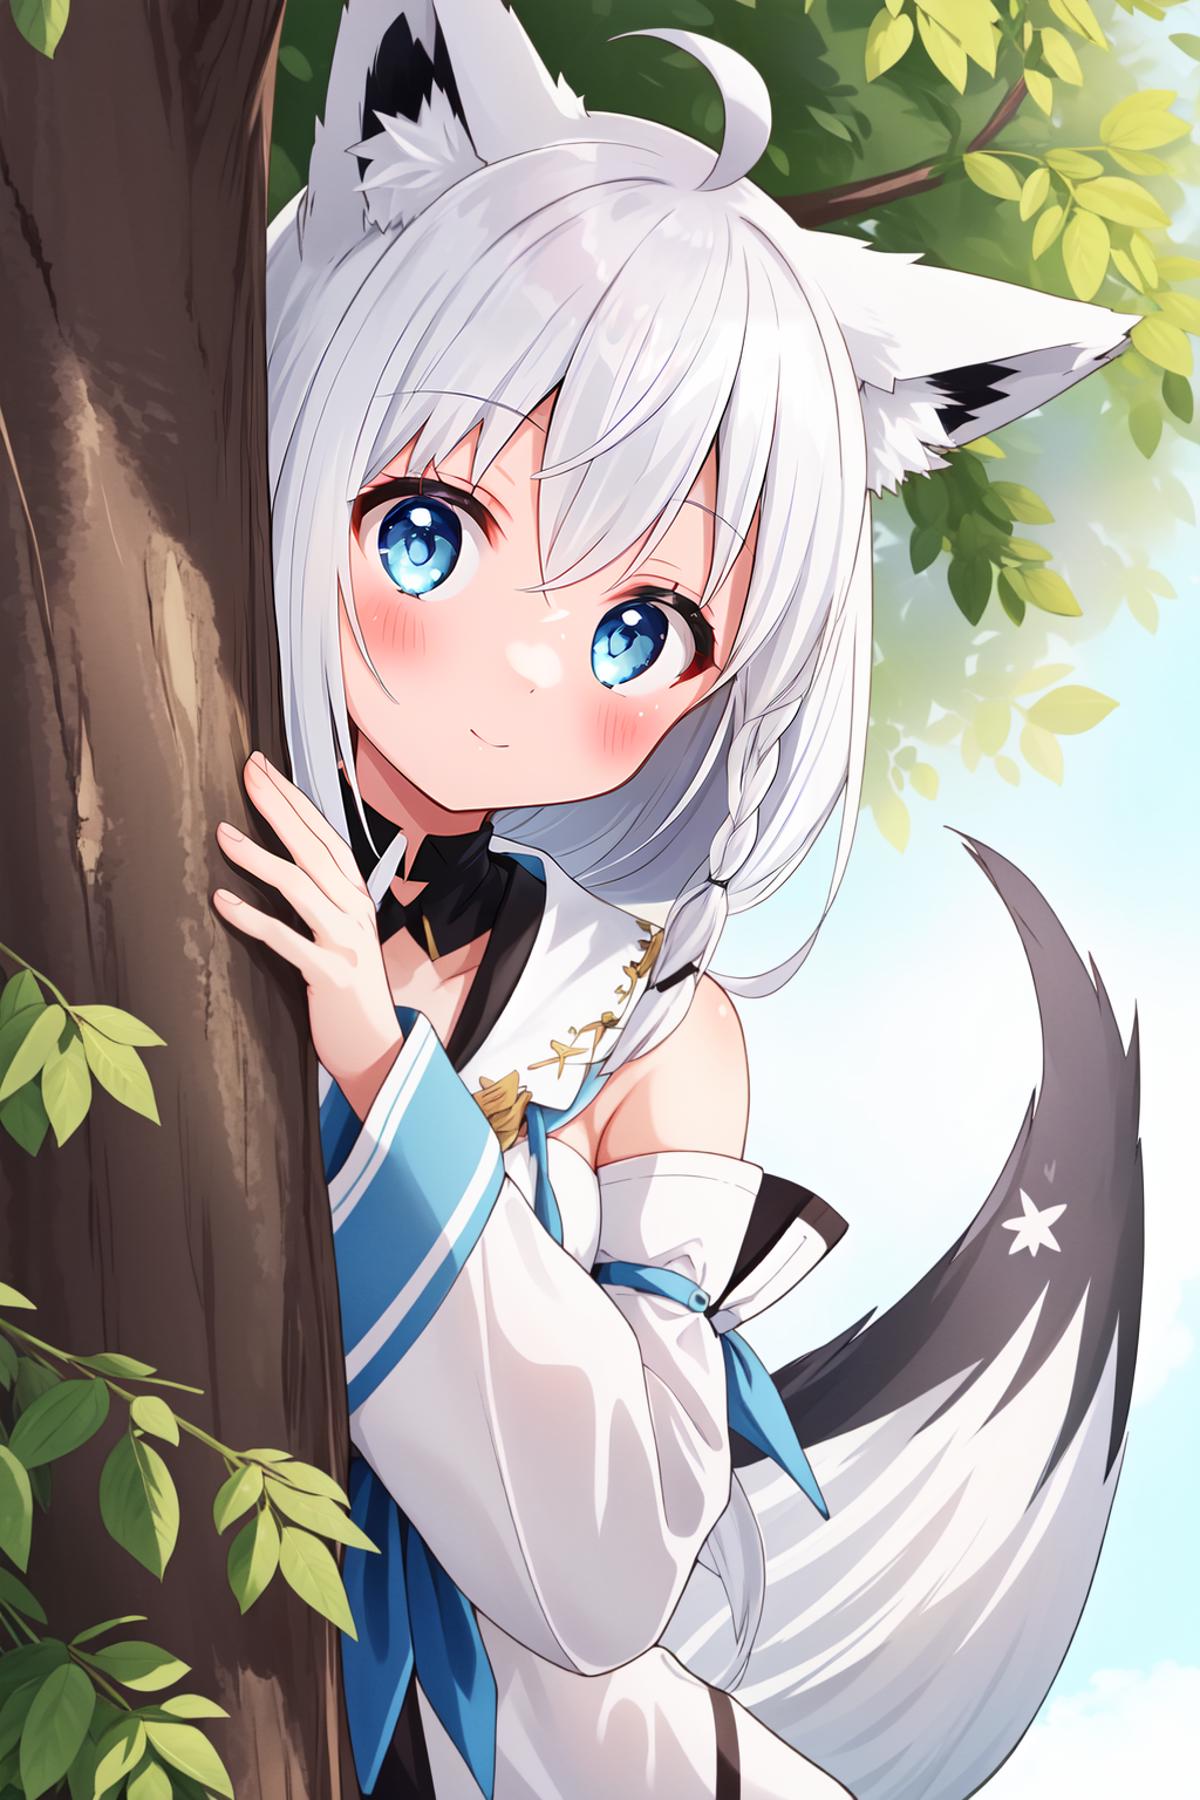 A White and Blue Anime Character Posing for a Picture with a Tree Trunk.